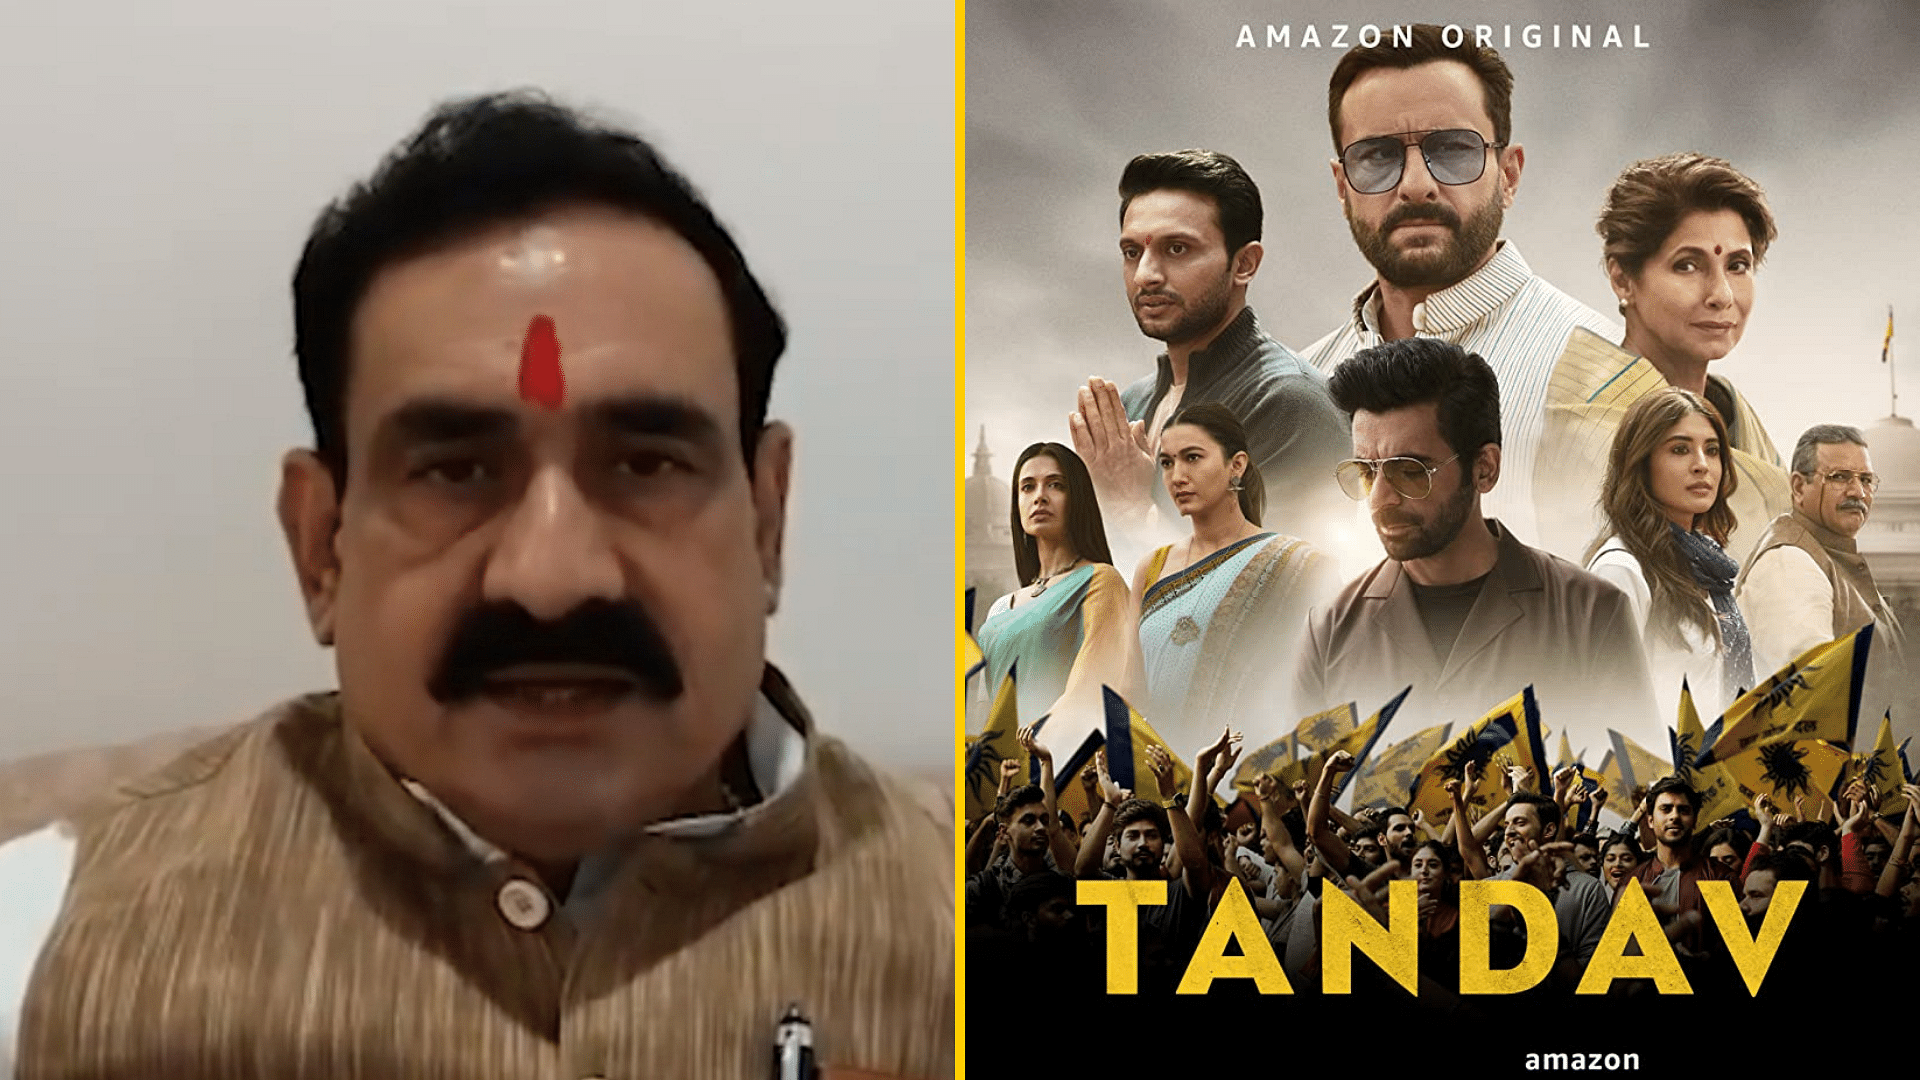 MP home minister Narottam Mishra  has said the government will take action against <i>Tandav</i> for hurting religious sentiments.